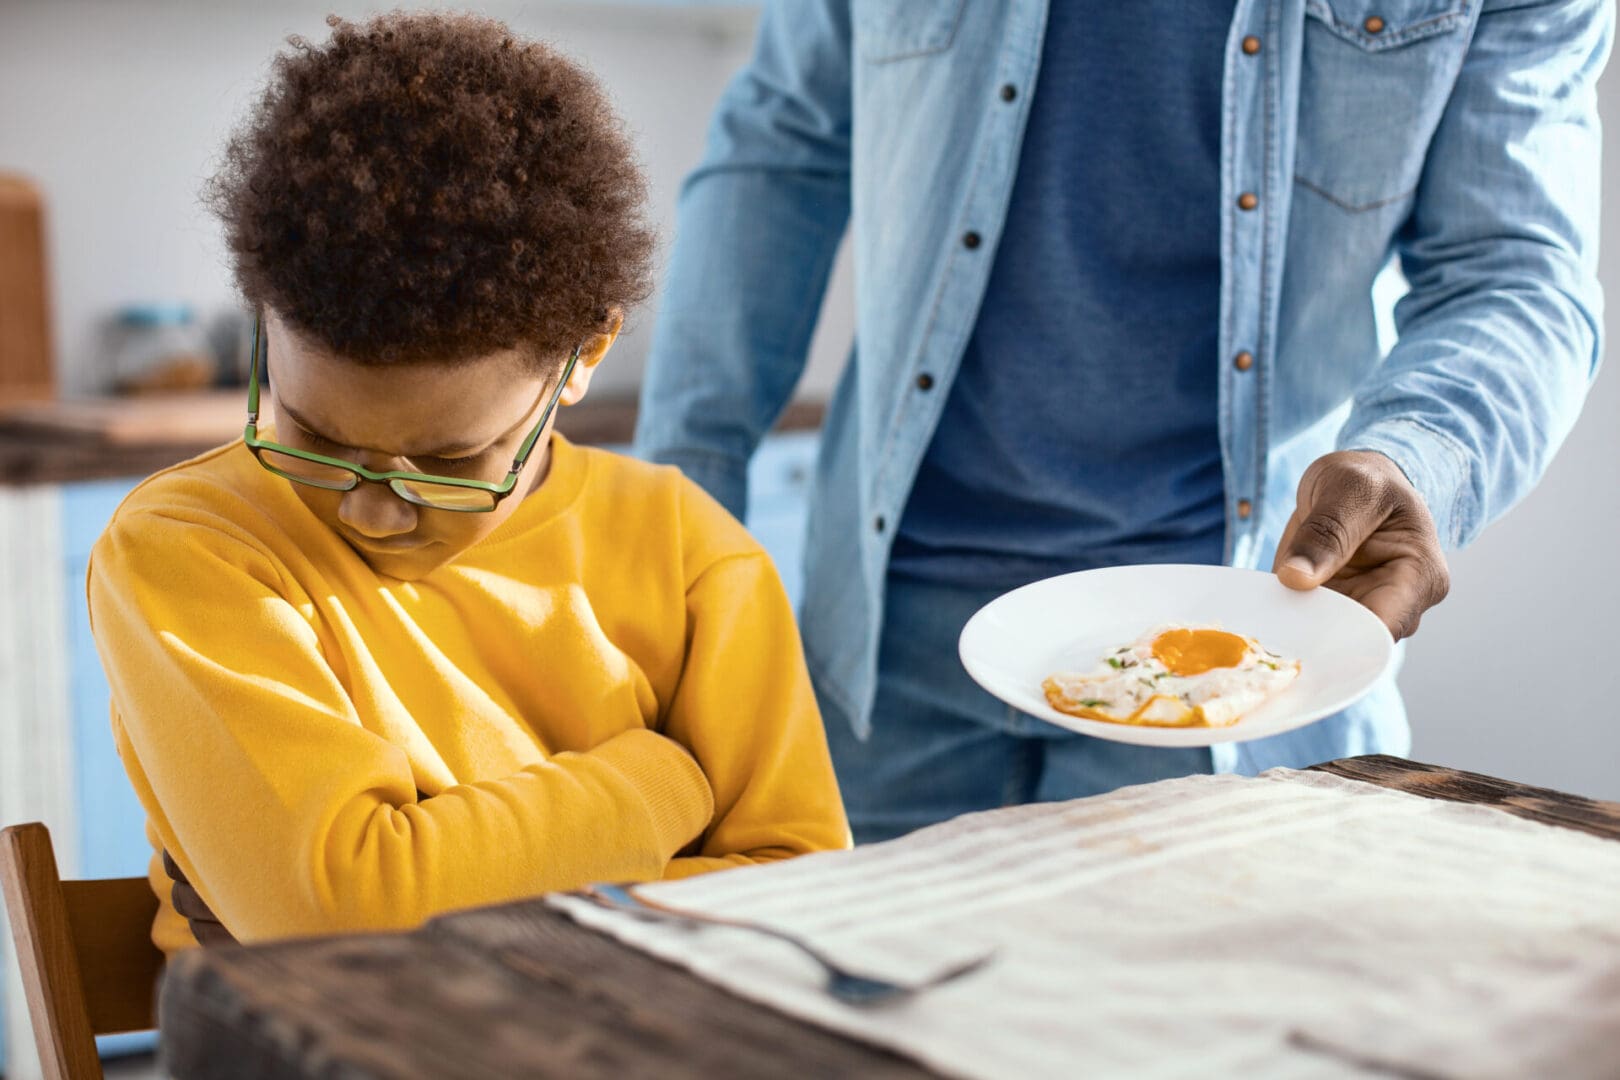 Child, a picky eater, showing disinterest in food while an adult offers a plate with an uneaten meal.